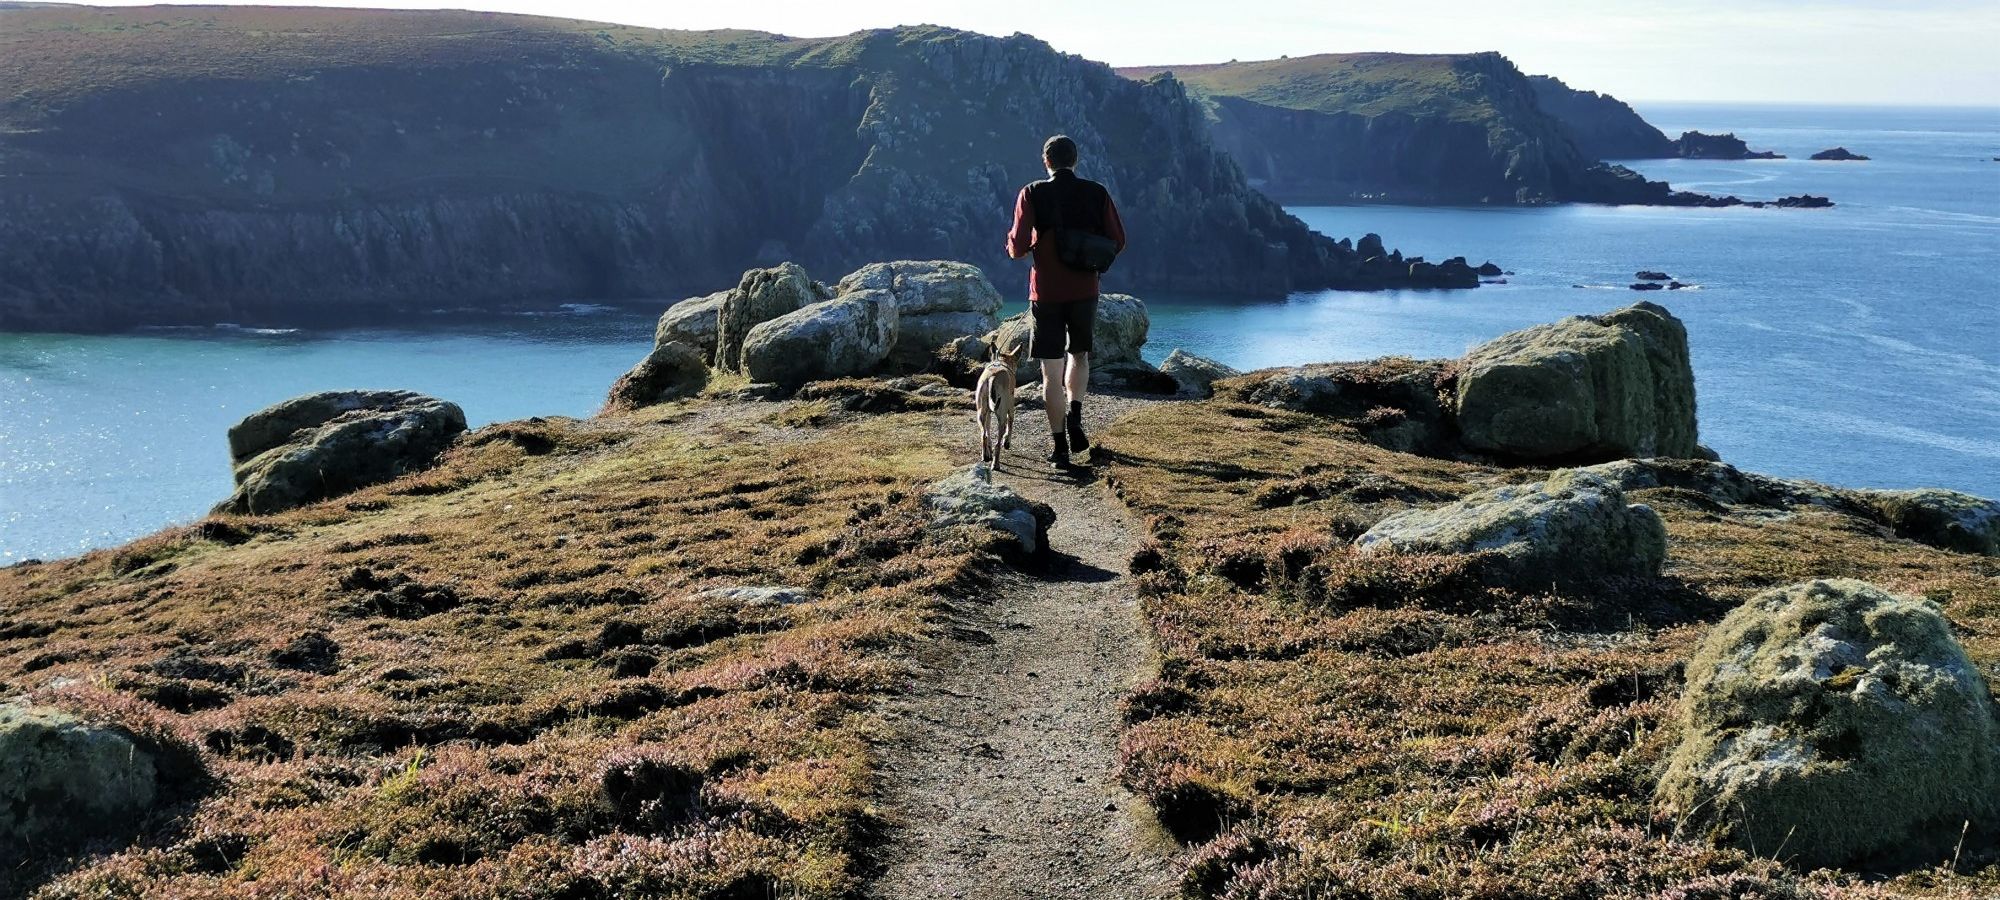 Walker and dog near Land's End